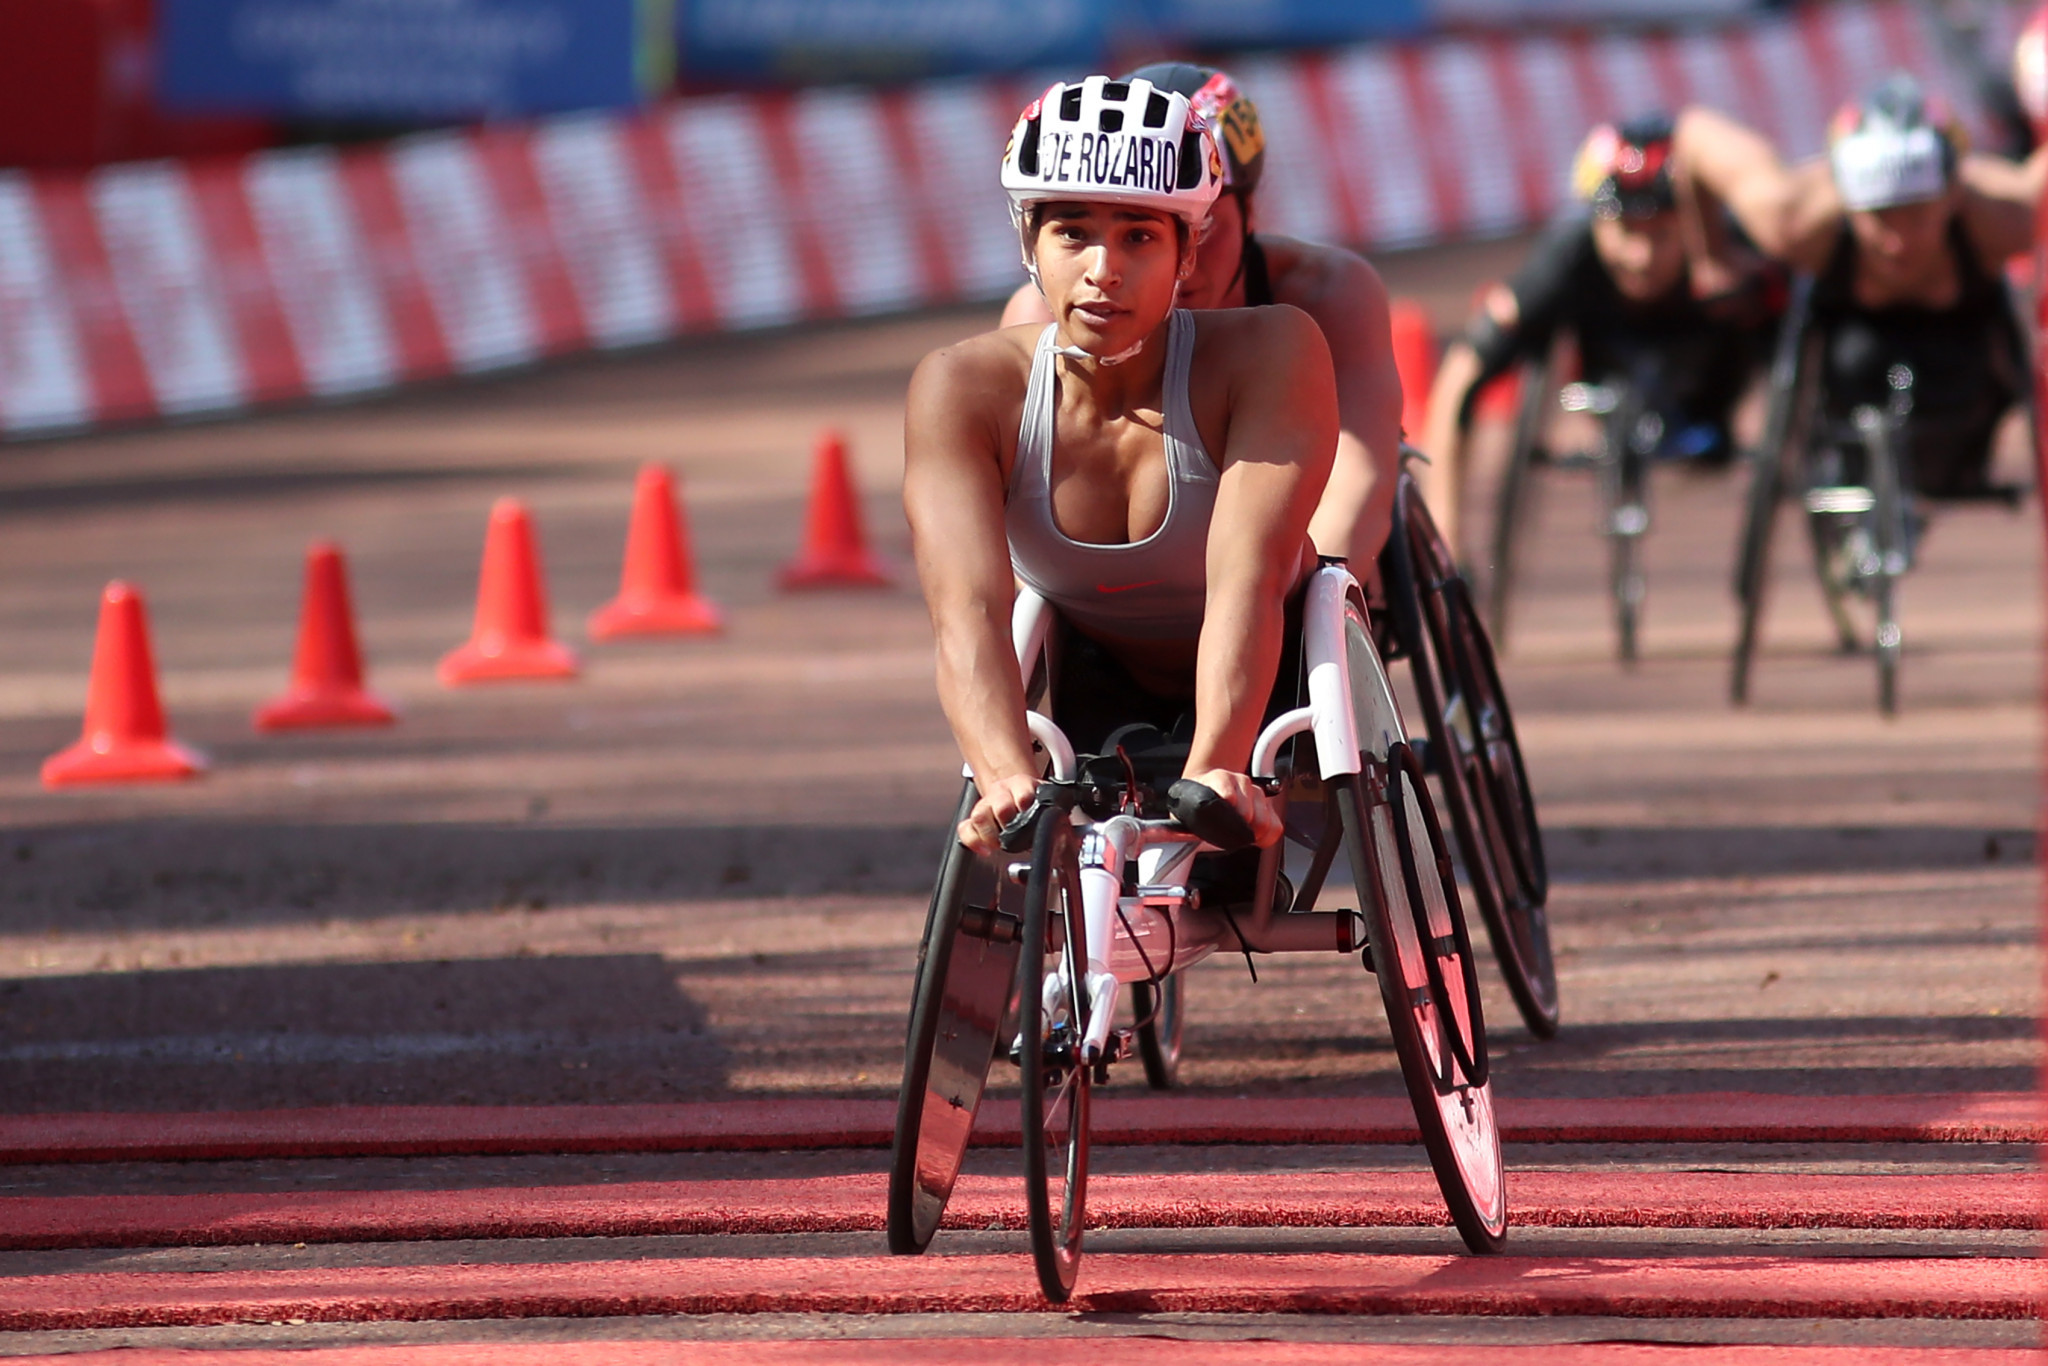 Madison De Rozario claimed a shock win in the women's wheelchair race ©Getty Images